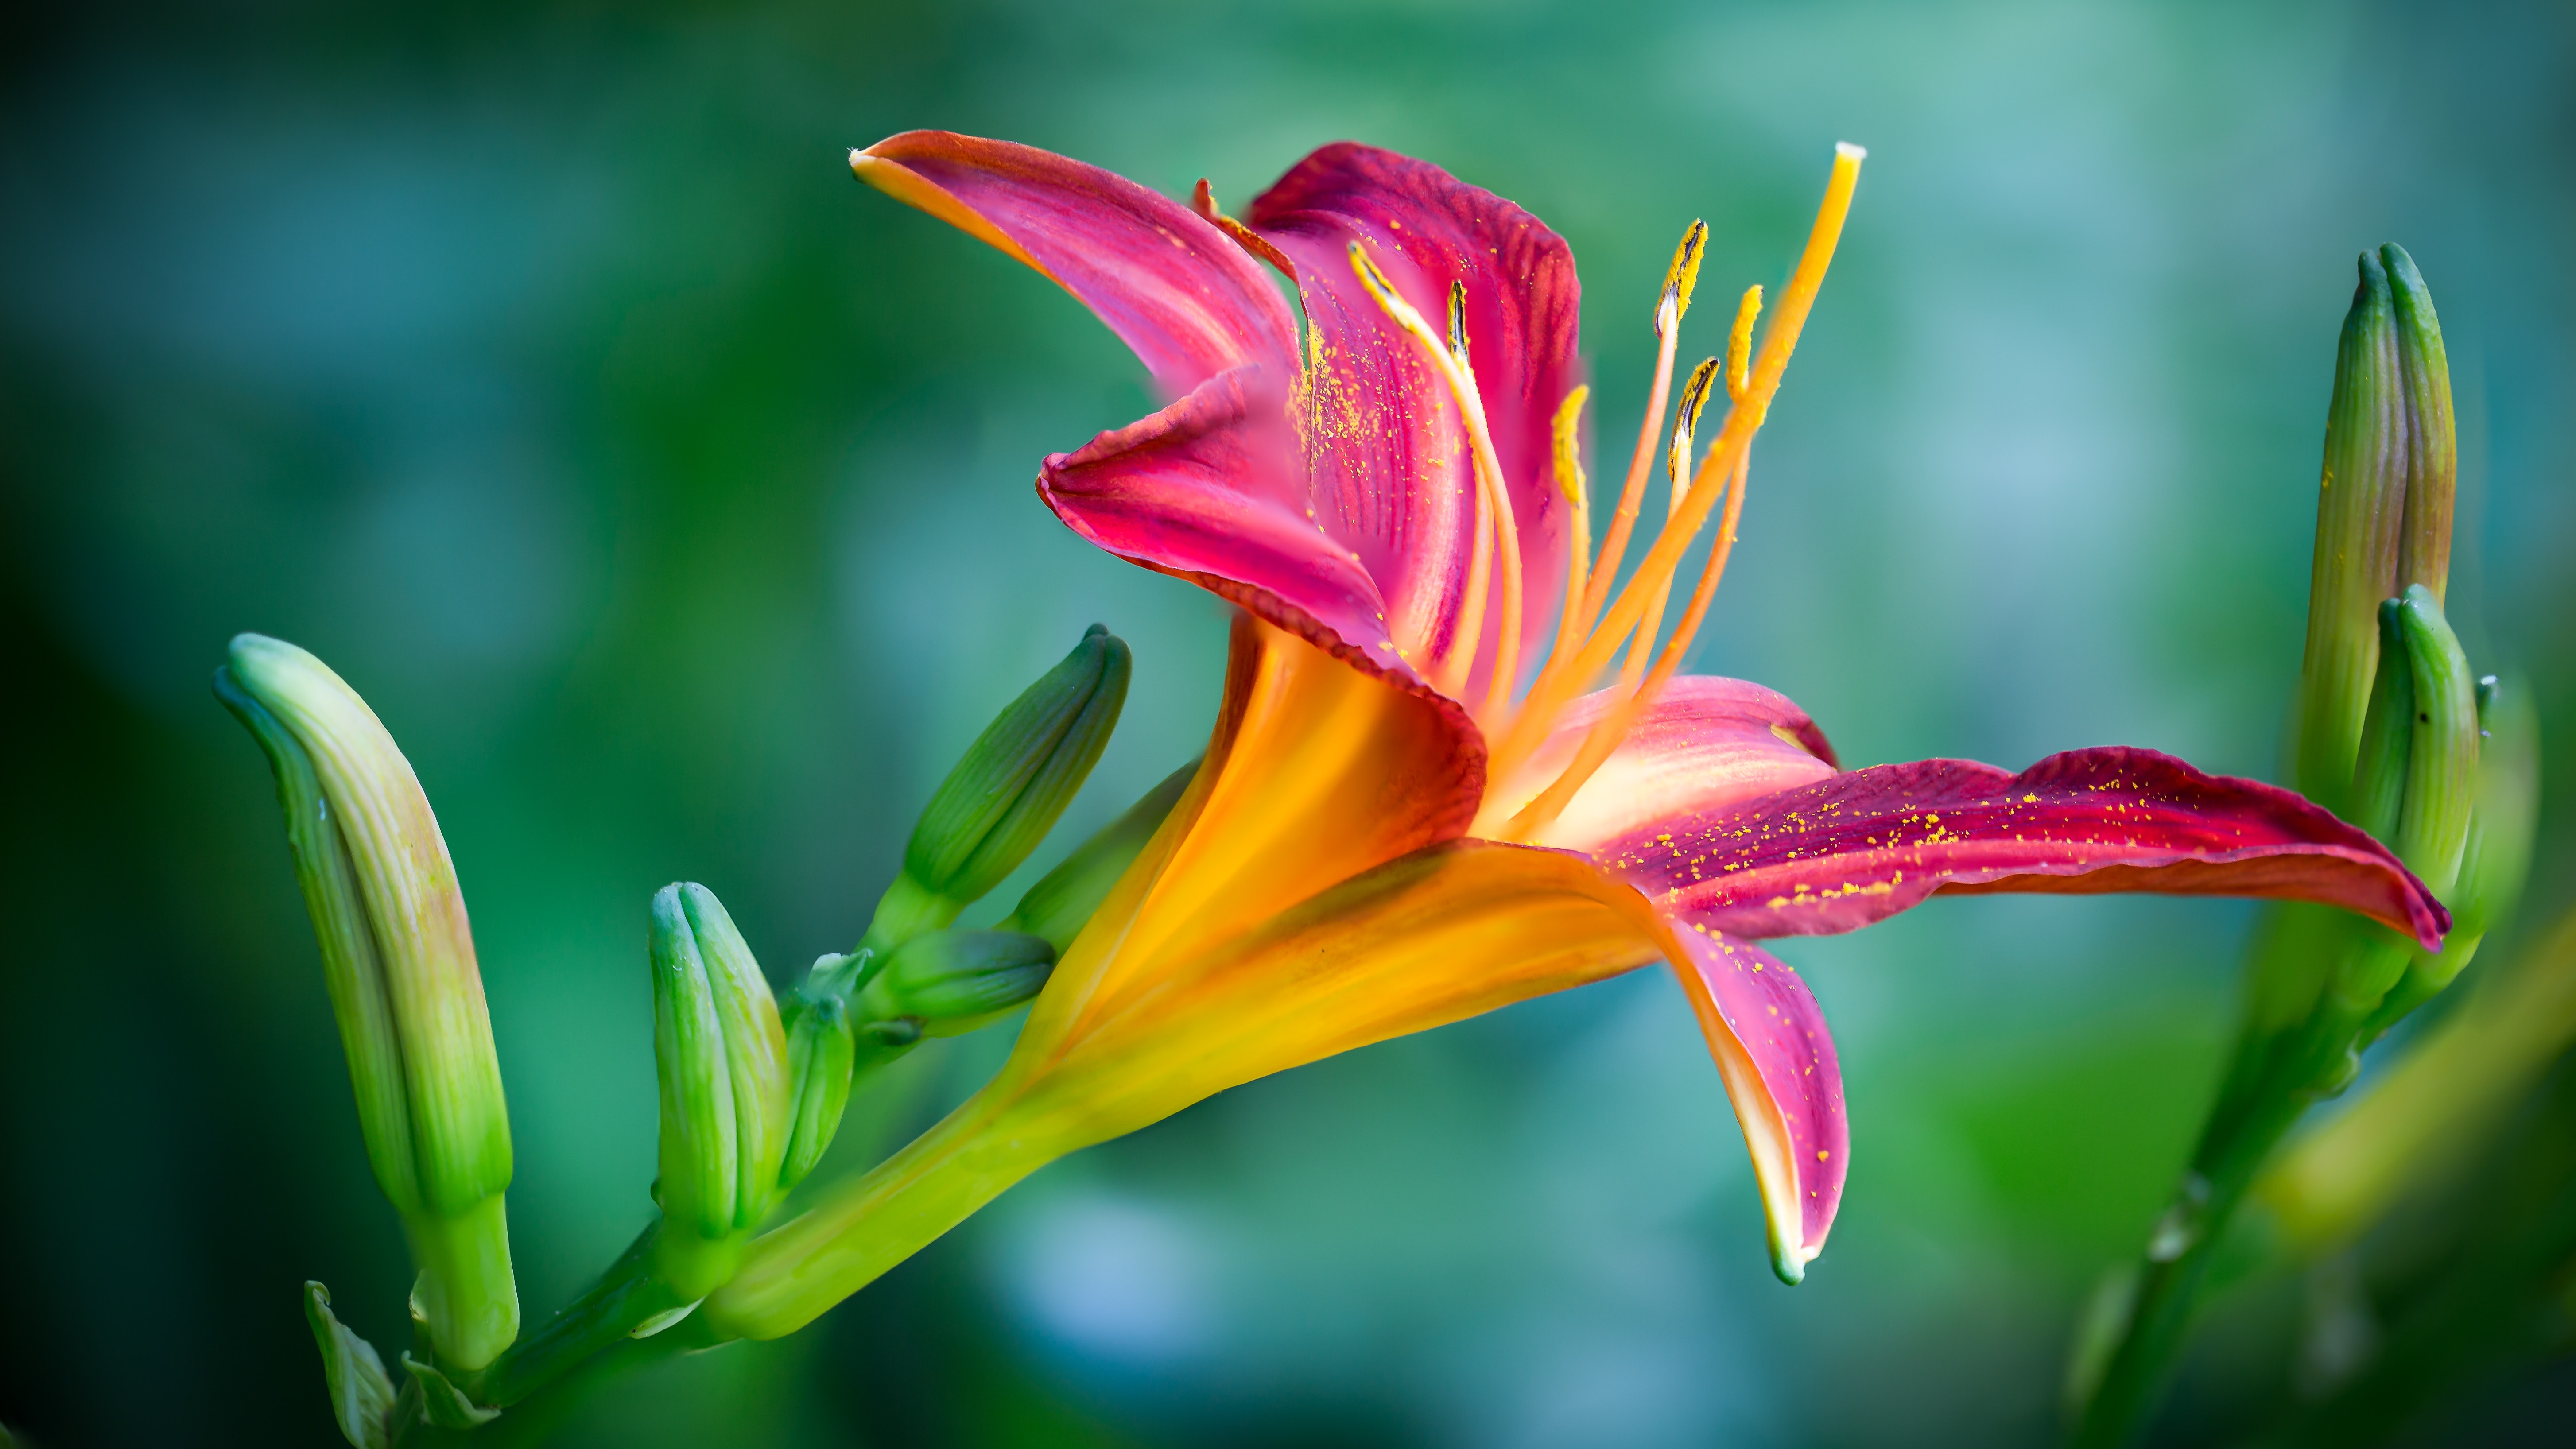 Neon Lily Beautiful Flowers Pictures Desktop Hd Wallpapers ...